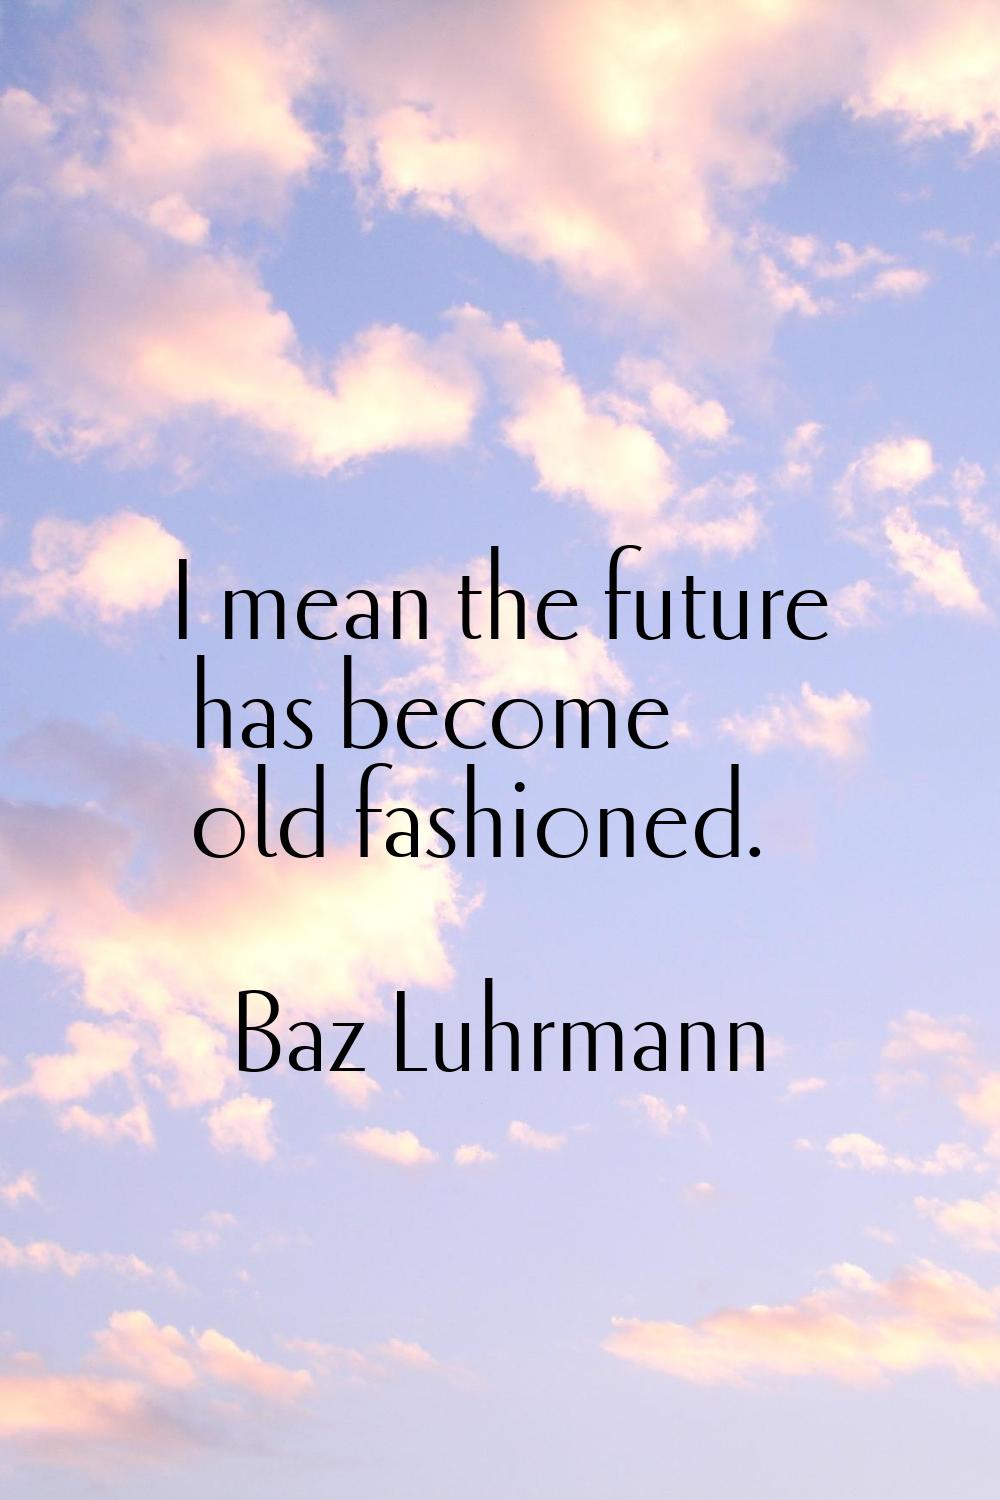 I mean the future has become old fashioned.